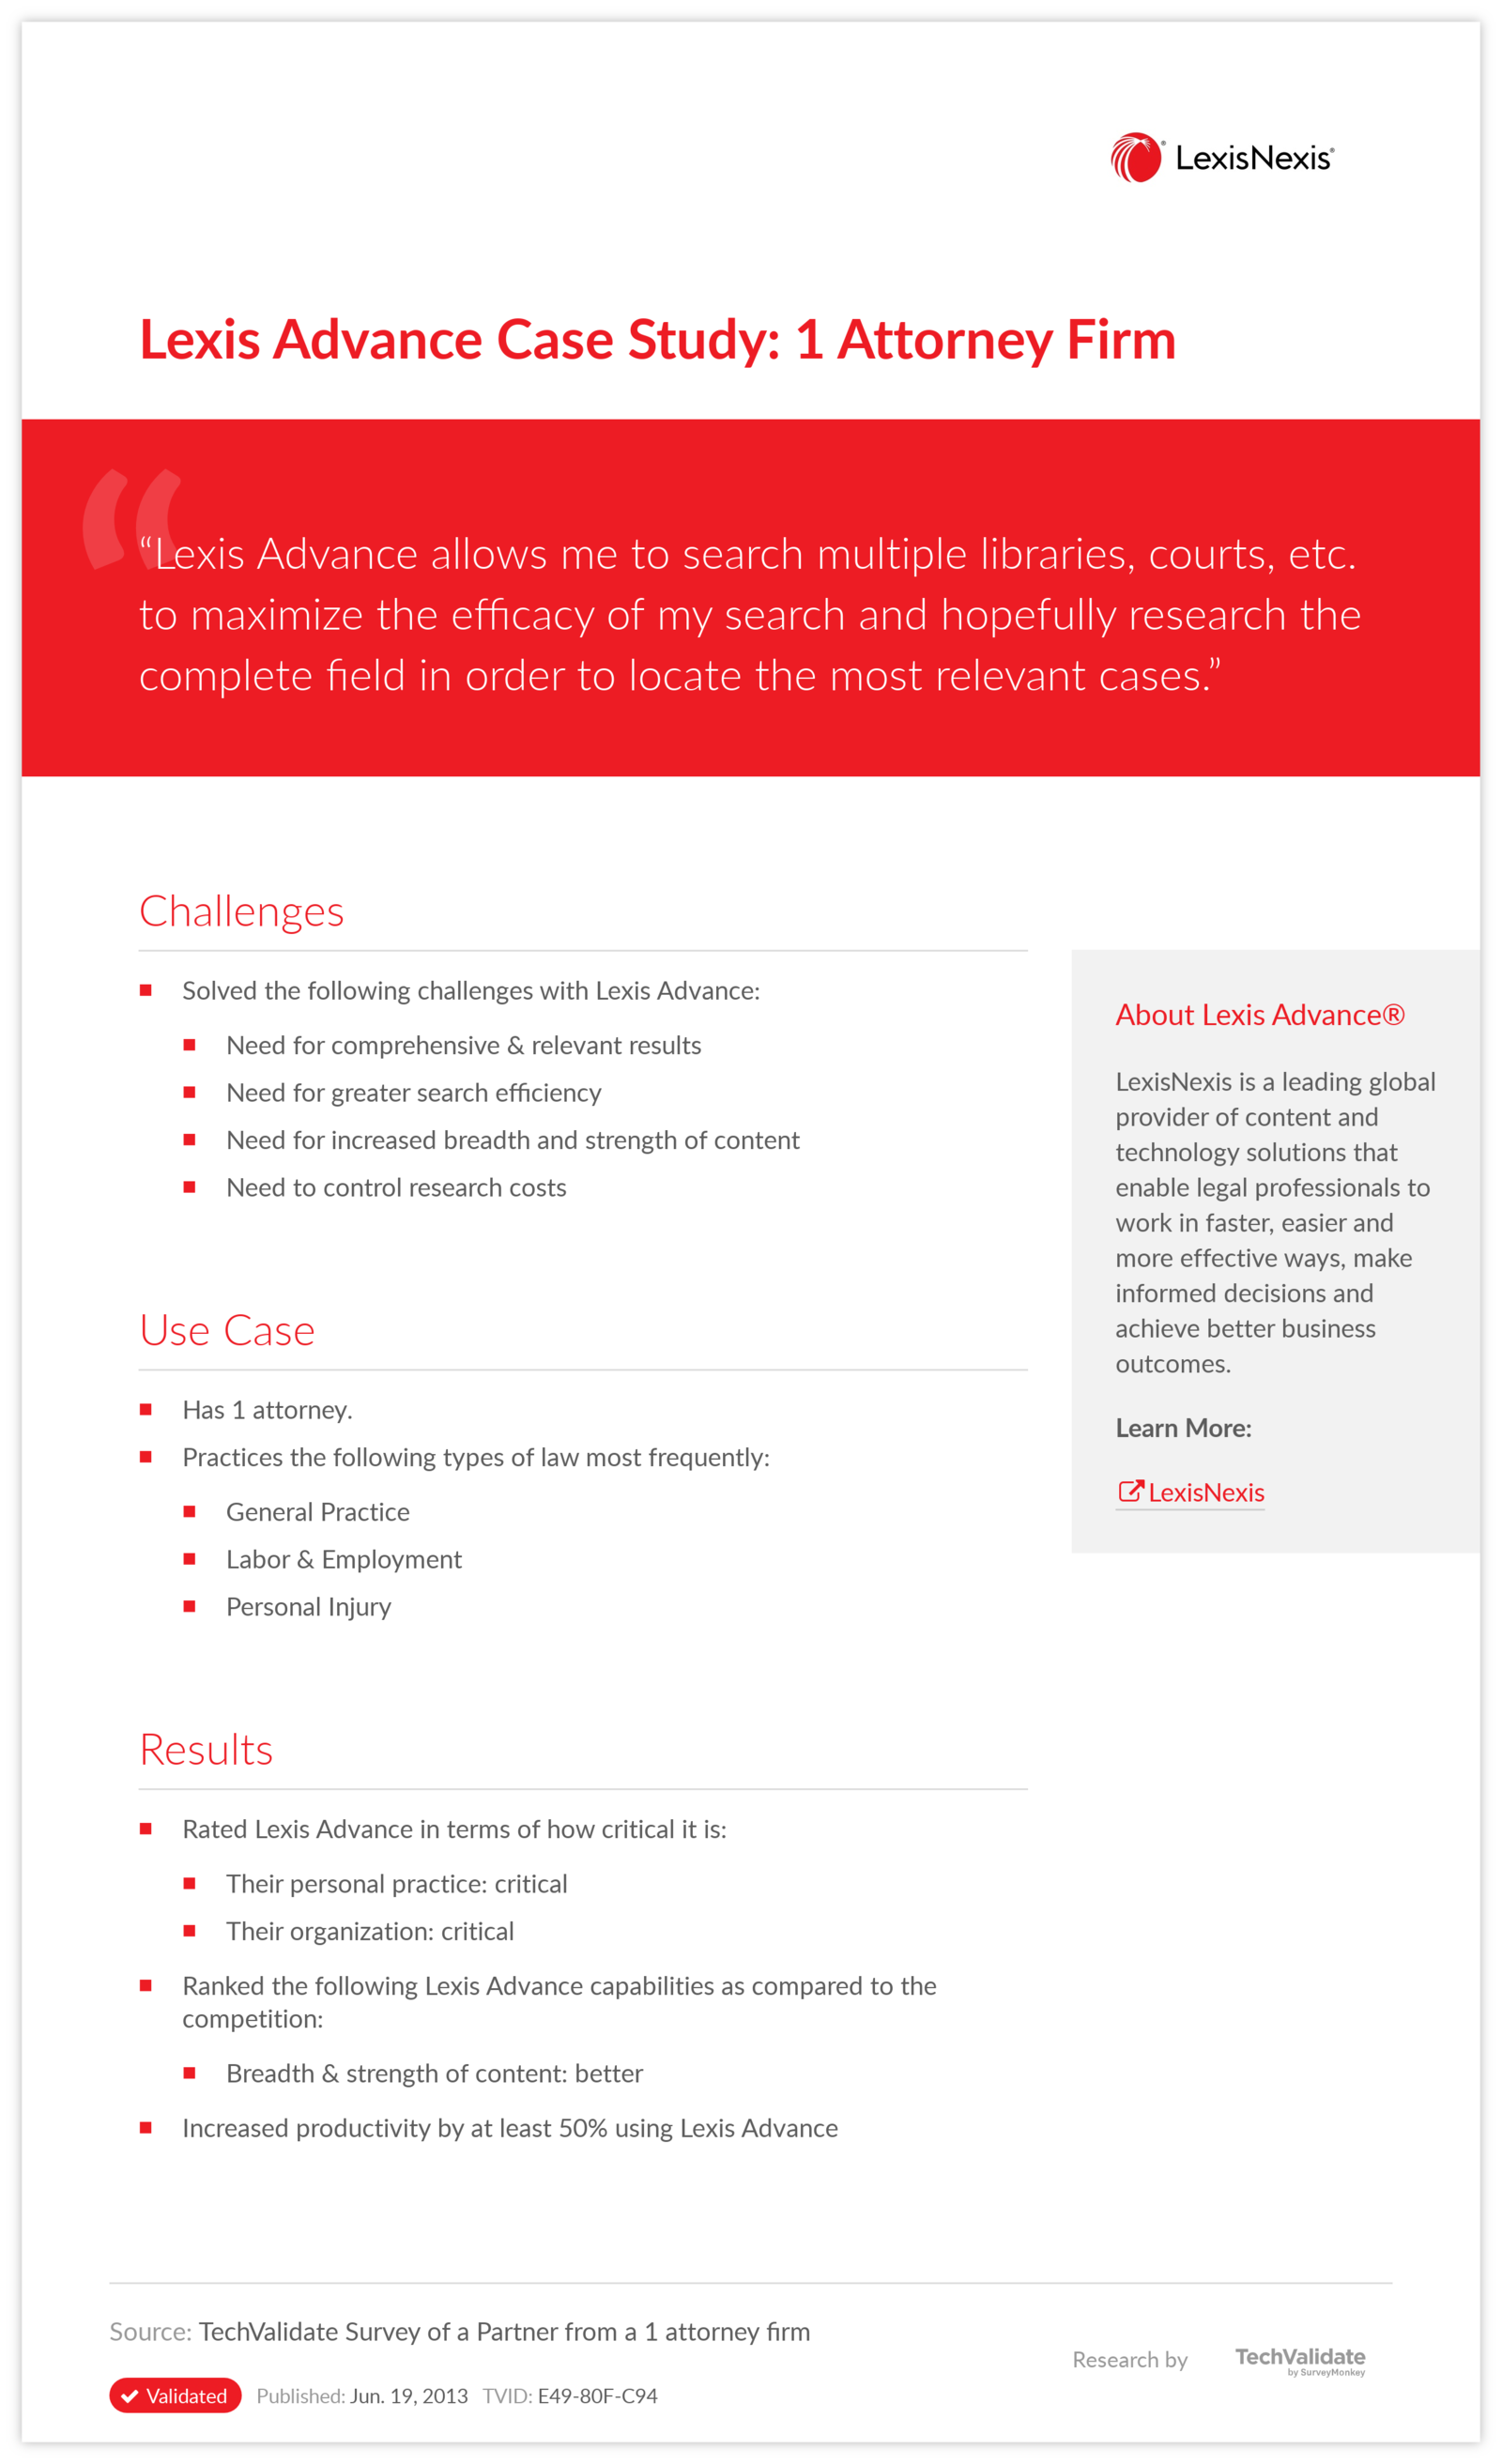 Lexis Advance Case Study: 1 Attorney Firm